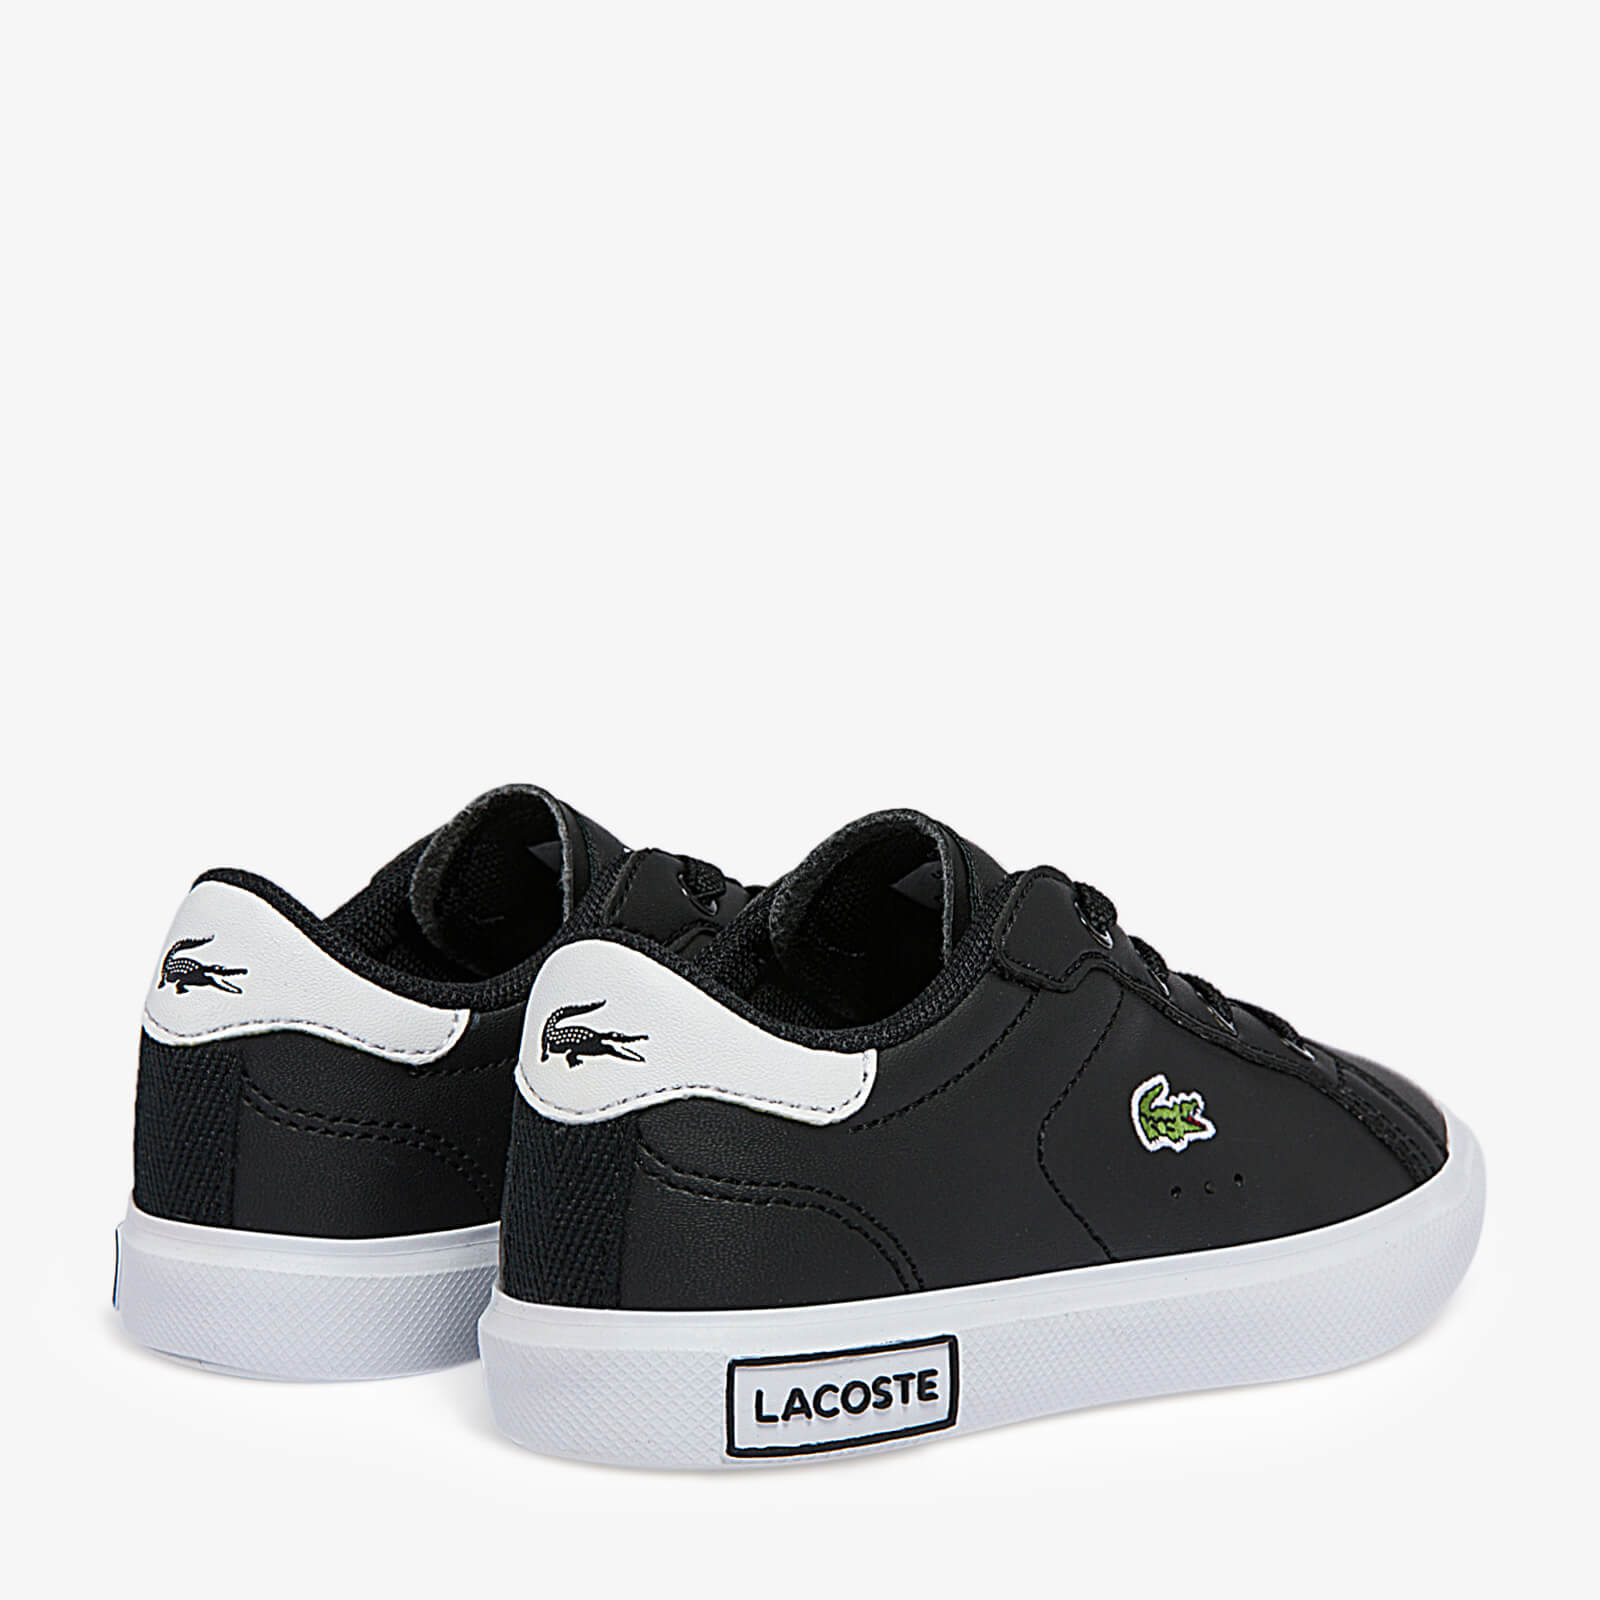 Lacoste Infant Powercourt Trainers - Black - Uk 5 Toddler